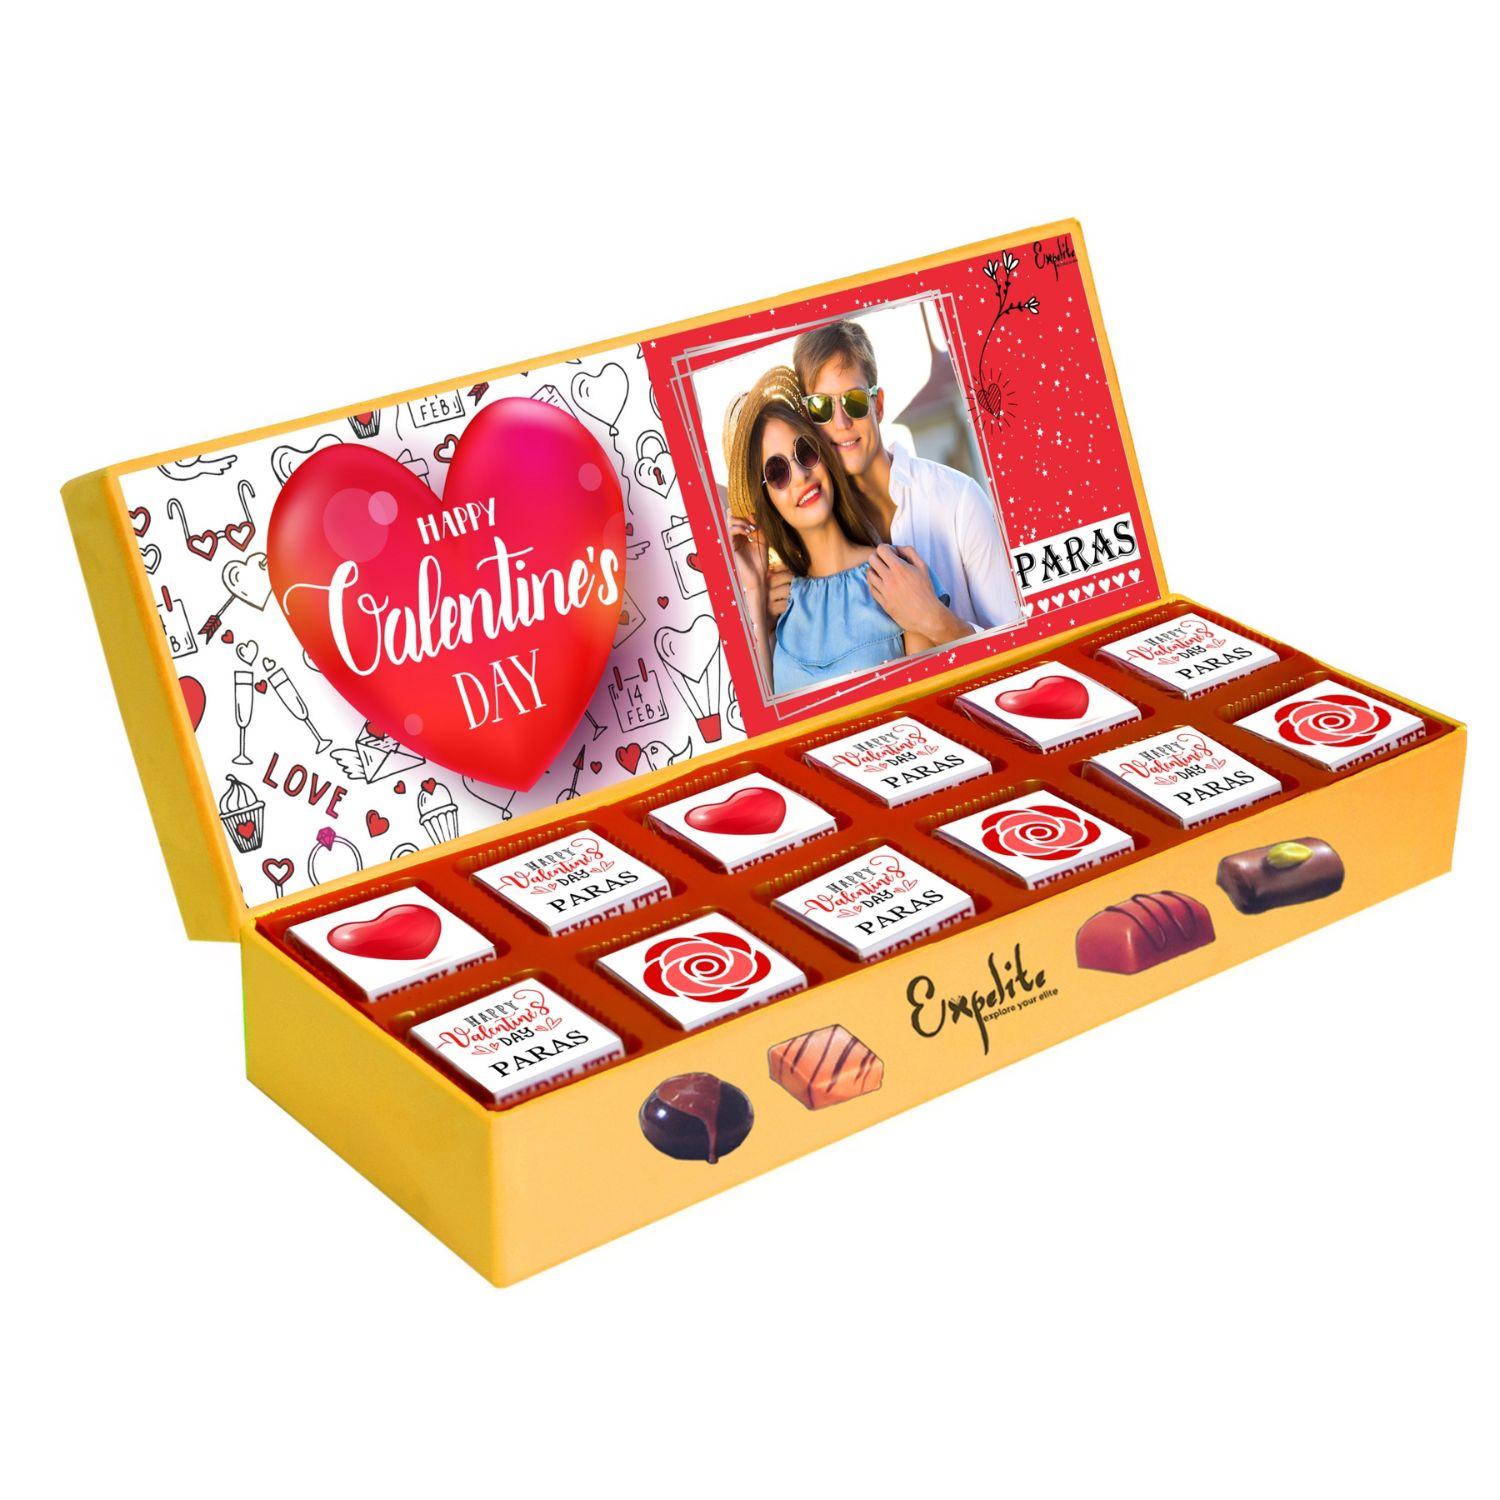 Buy Midiron Lovely Anniversary Combo Gift For Wife/Women/  Girlfriend|Romantic Gift For Valentines Day with Chocolate Bars, Red Heart  Shape Tin Box with Small Teddy & Love Greeting Card Online at Best Prices